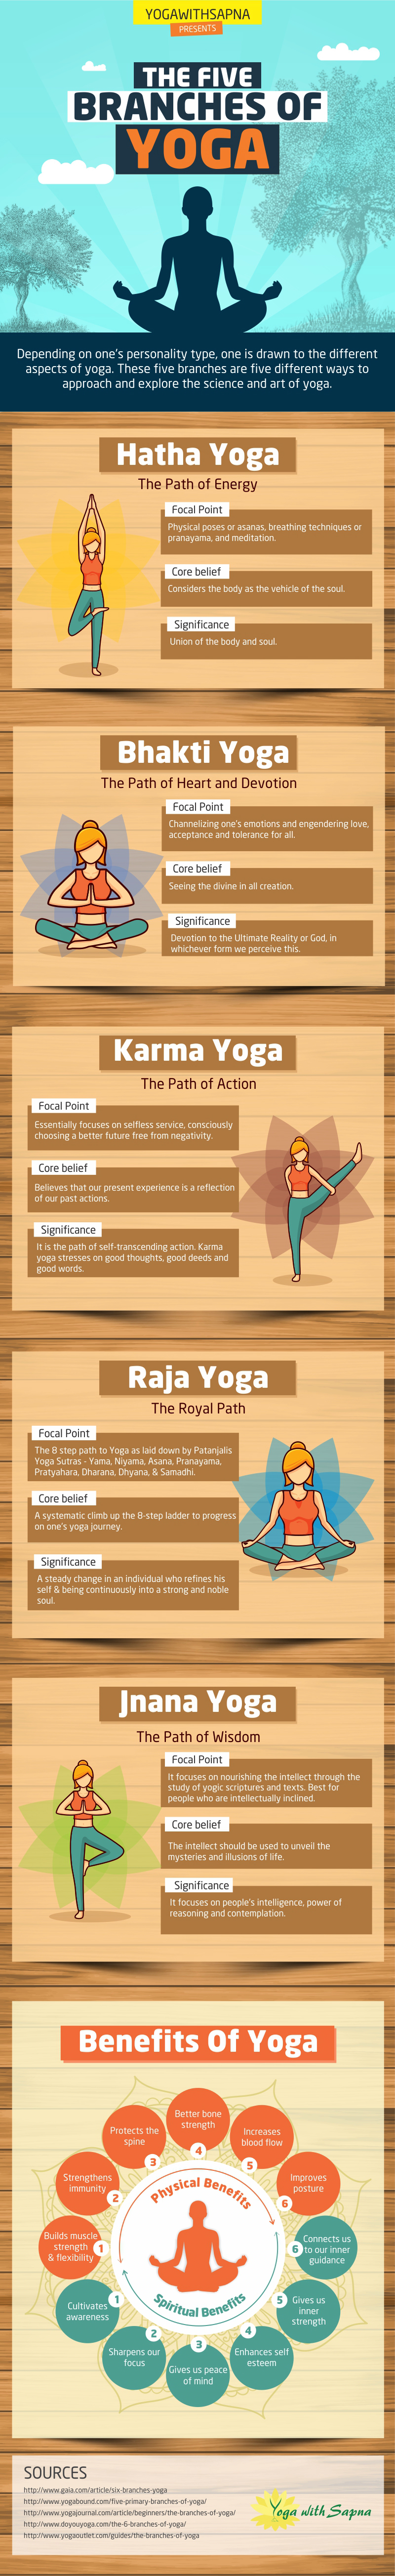 The Five Branches of Yoga